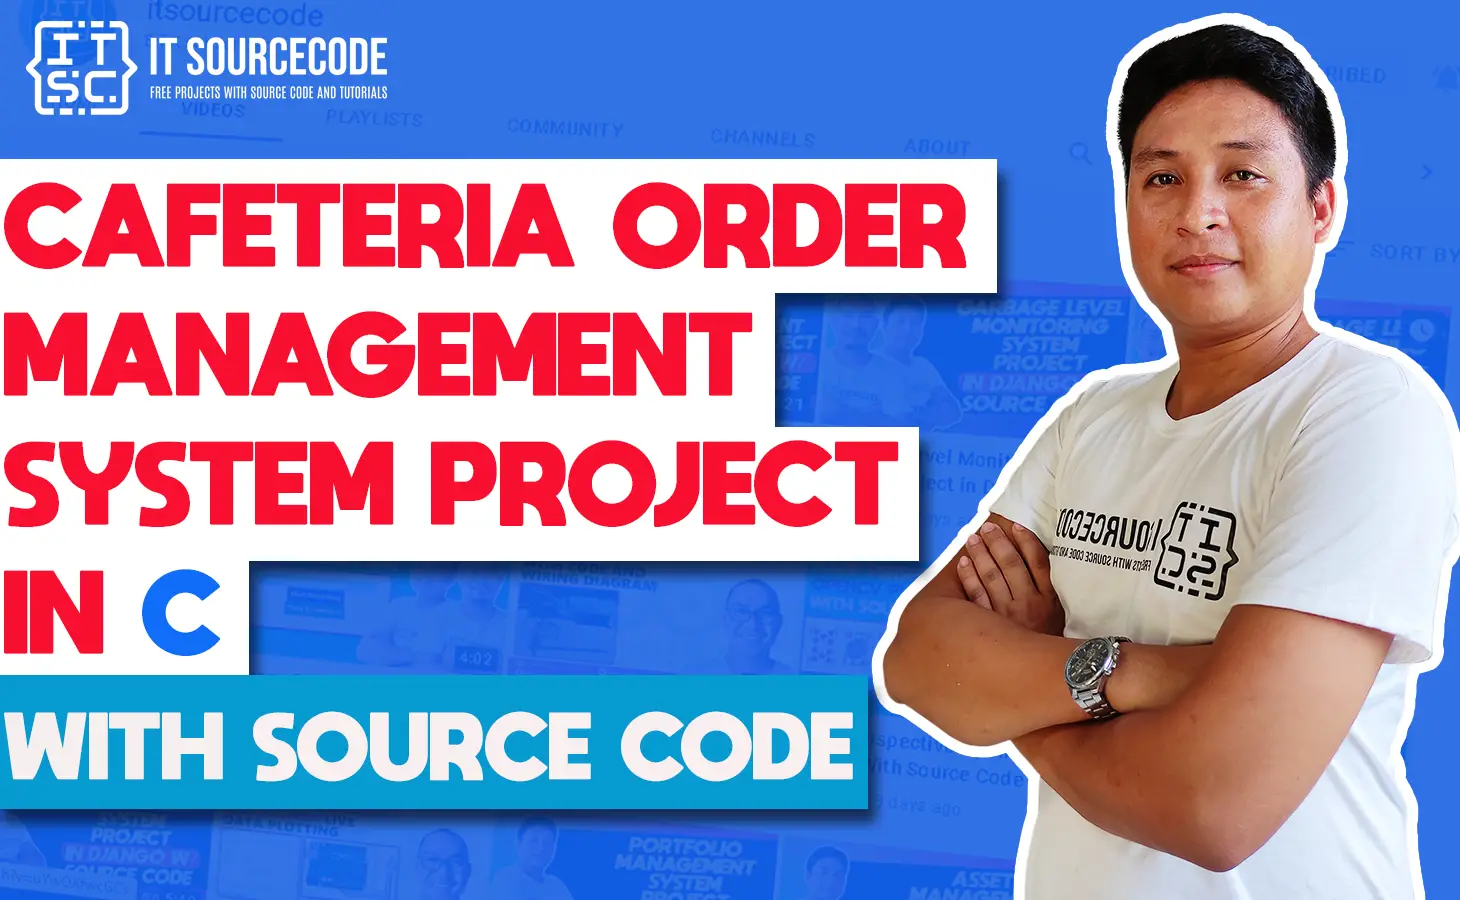 Cafeteria Order Management System Project in C with Source Code